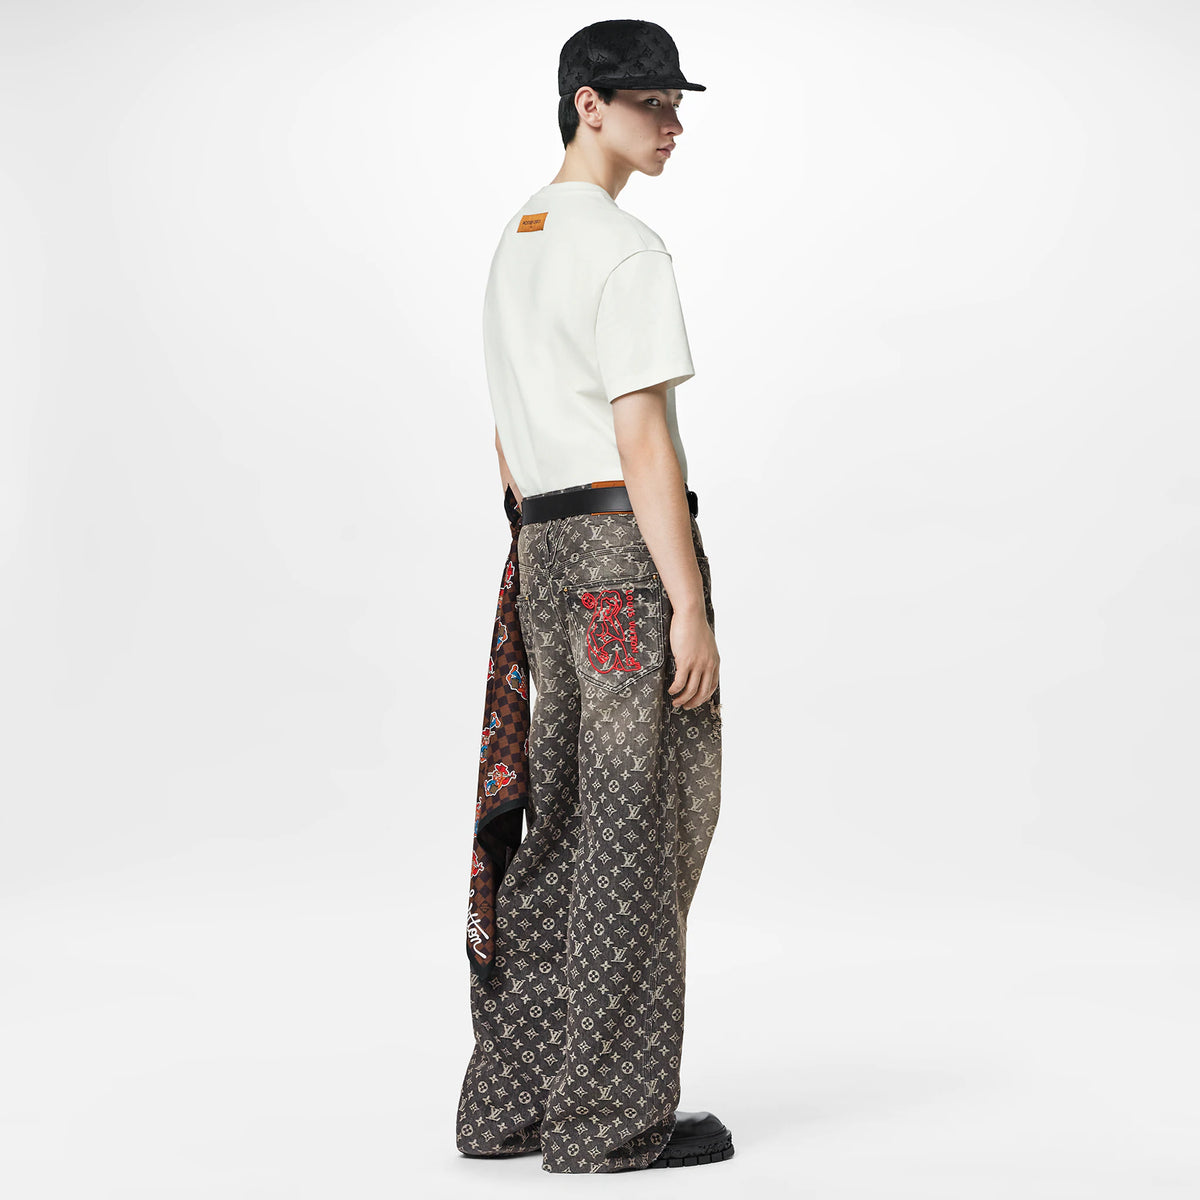 Products by Louis Vuitton: Baggy Denim Pants - Wishupon